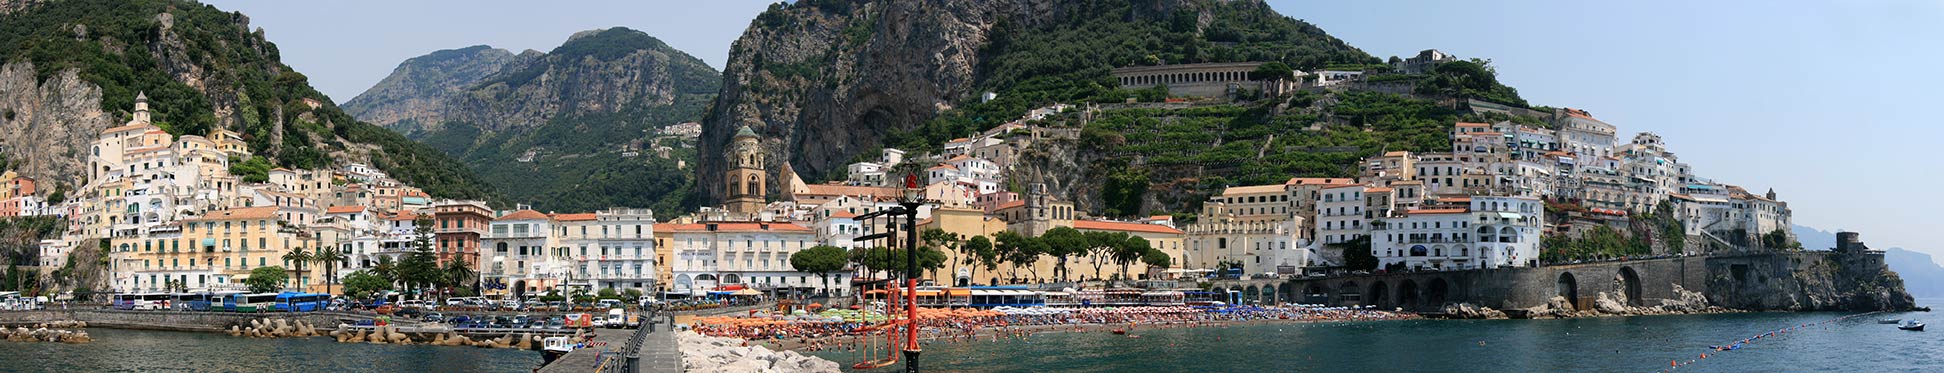 Panoramic view of Amalfi with the Amalfi Cathedral in Southern Italy